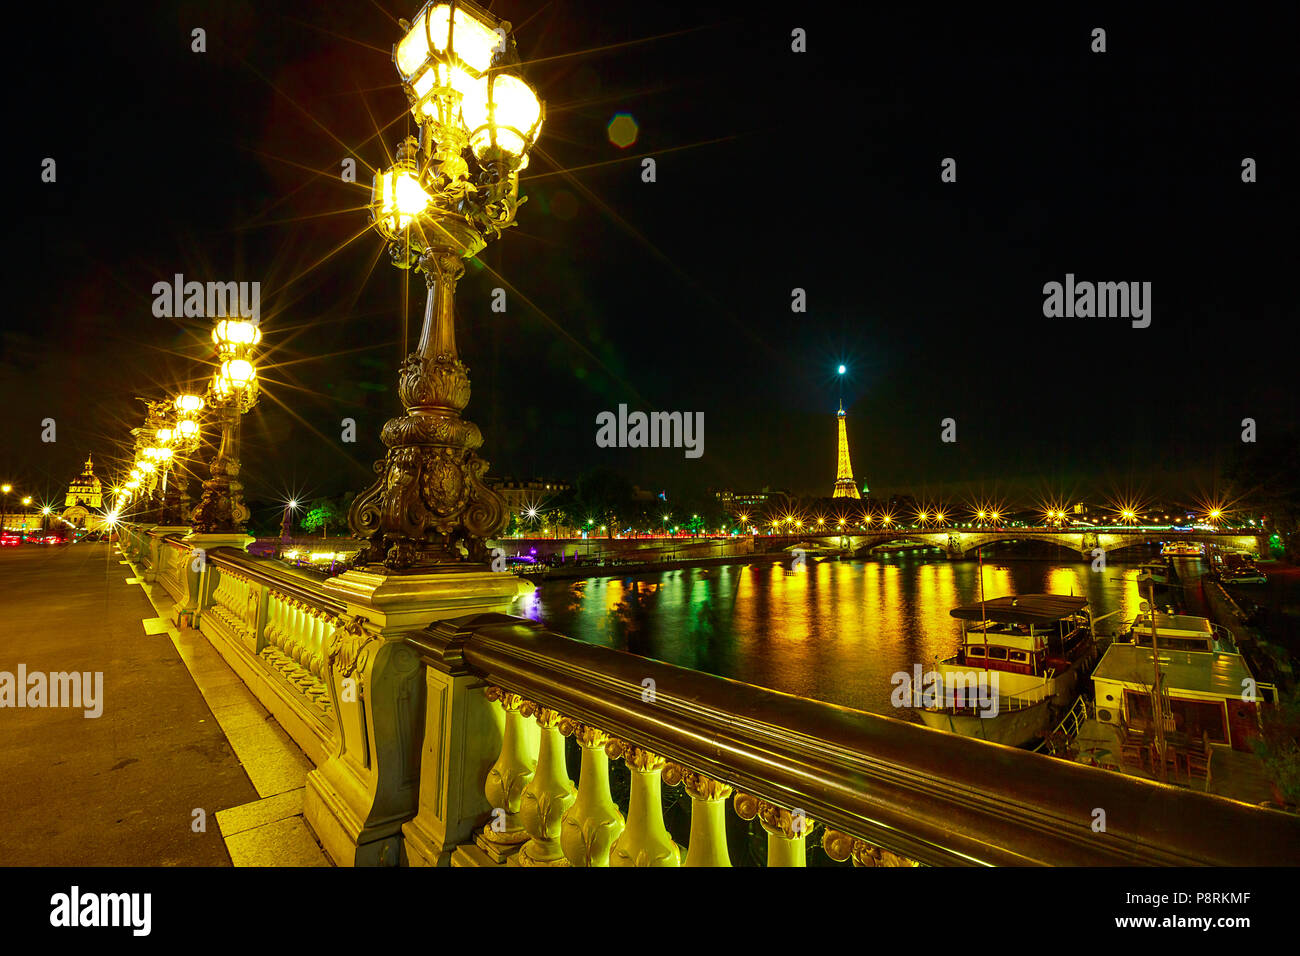 Paris lights on in Pont Alexandre III bridge with lighted lamps. French European capital with Eiffel Tower and Paris night skyline in France. Night urban scene. Stock Photo